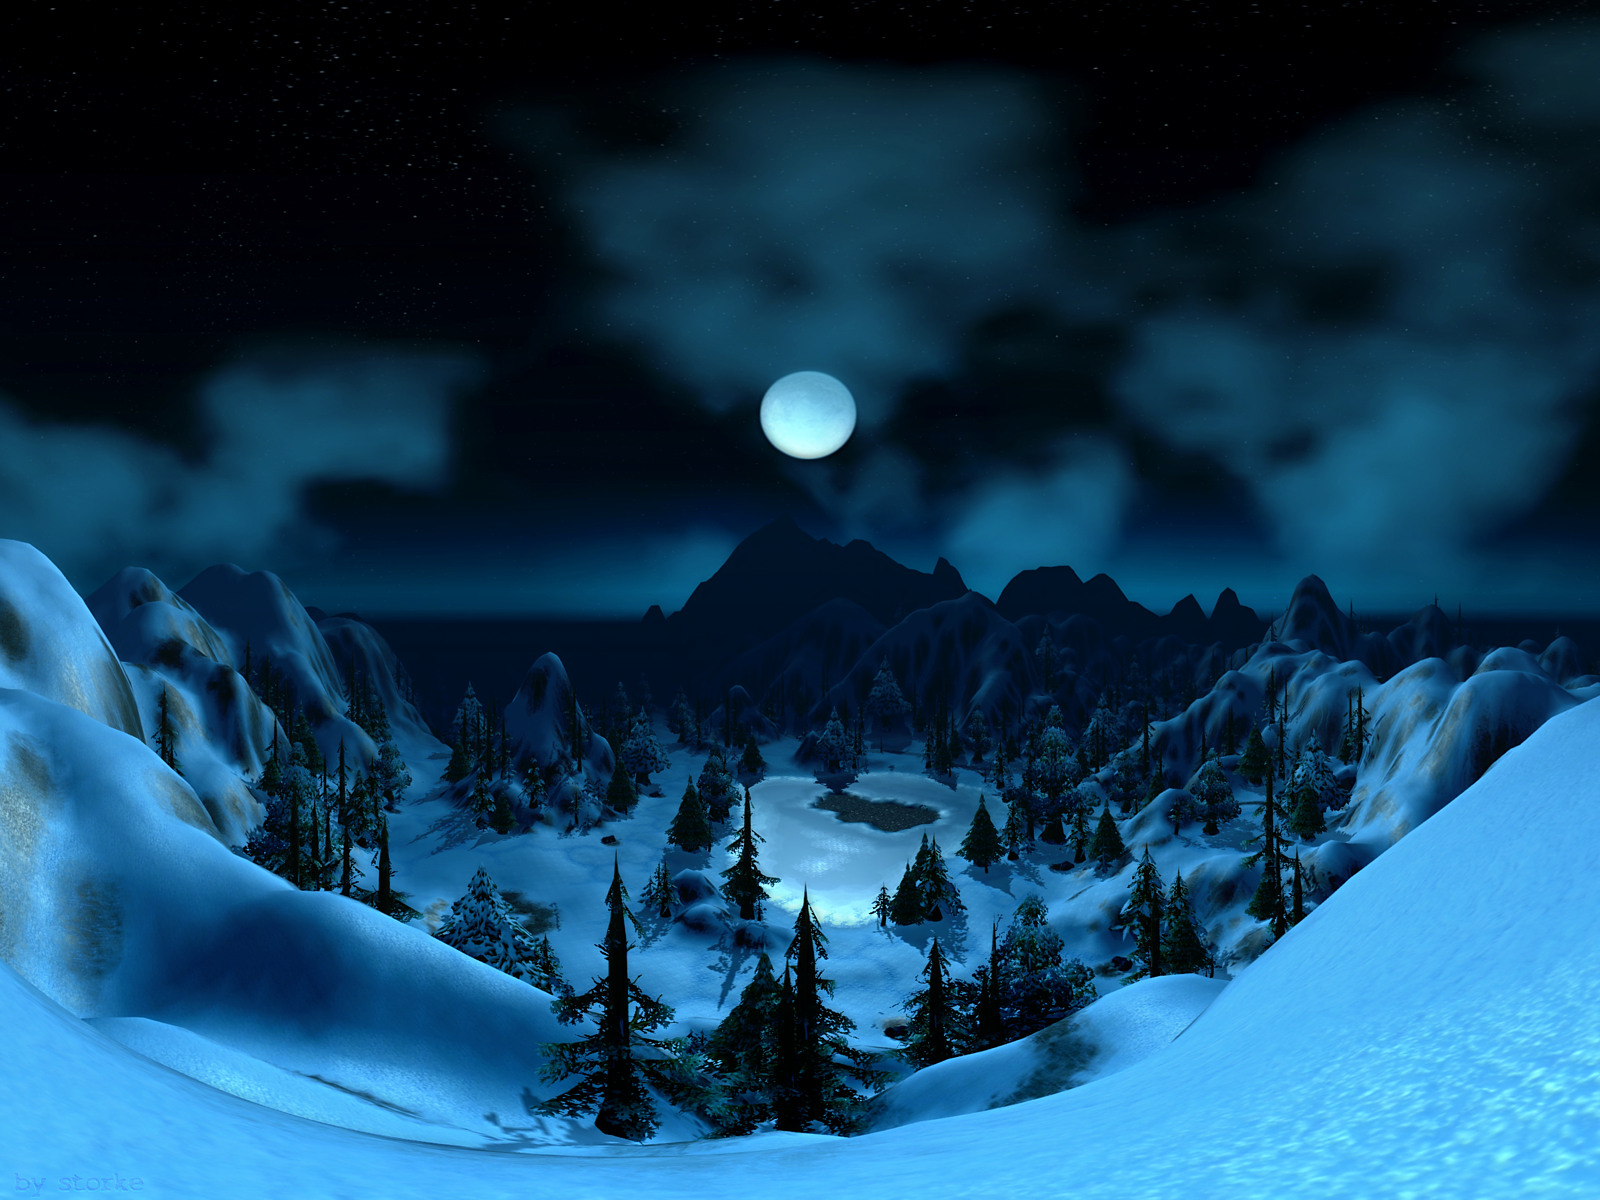 Download background tree, snow, moon, starry sky, landscape, artistic, night